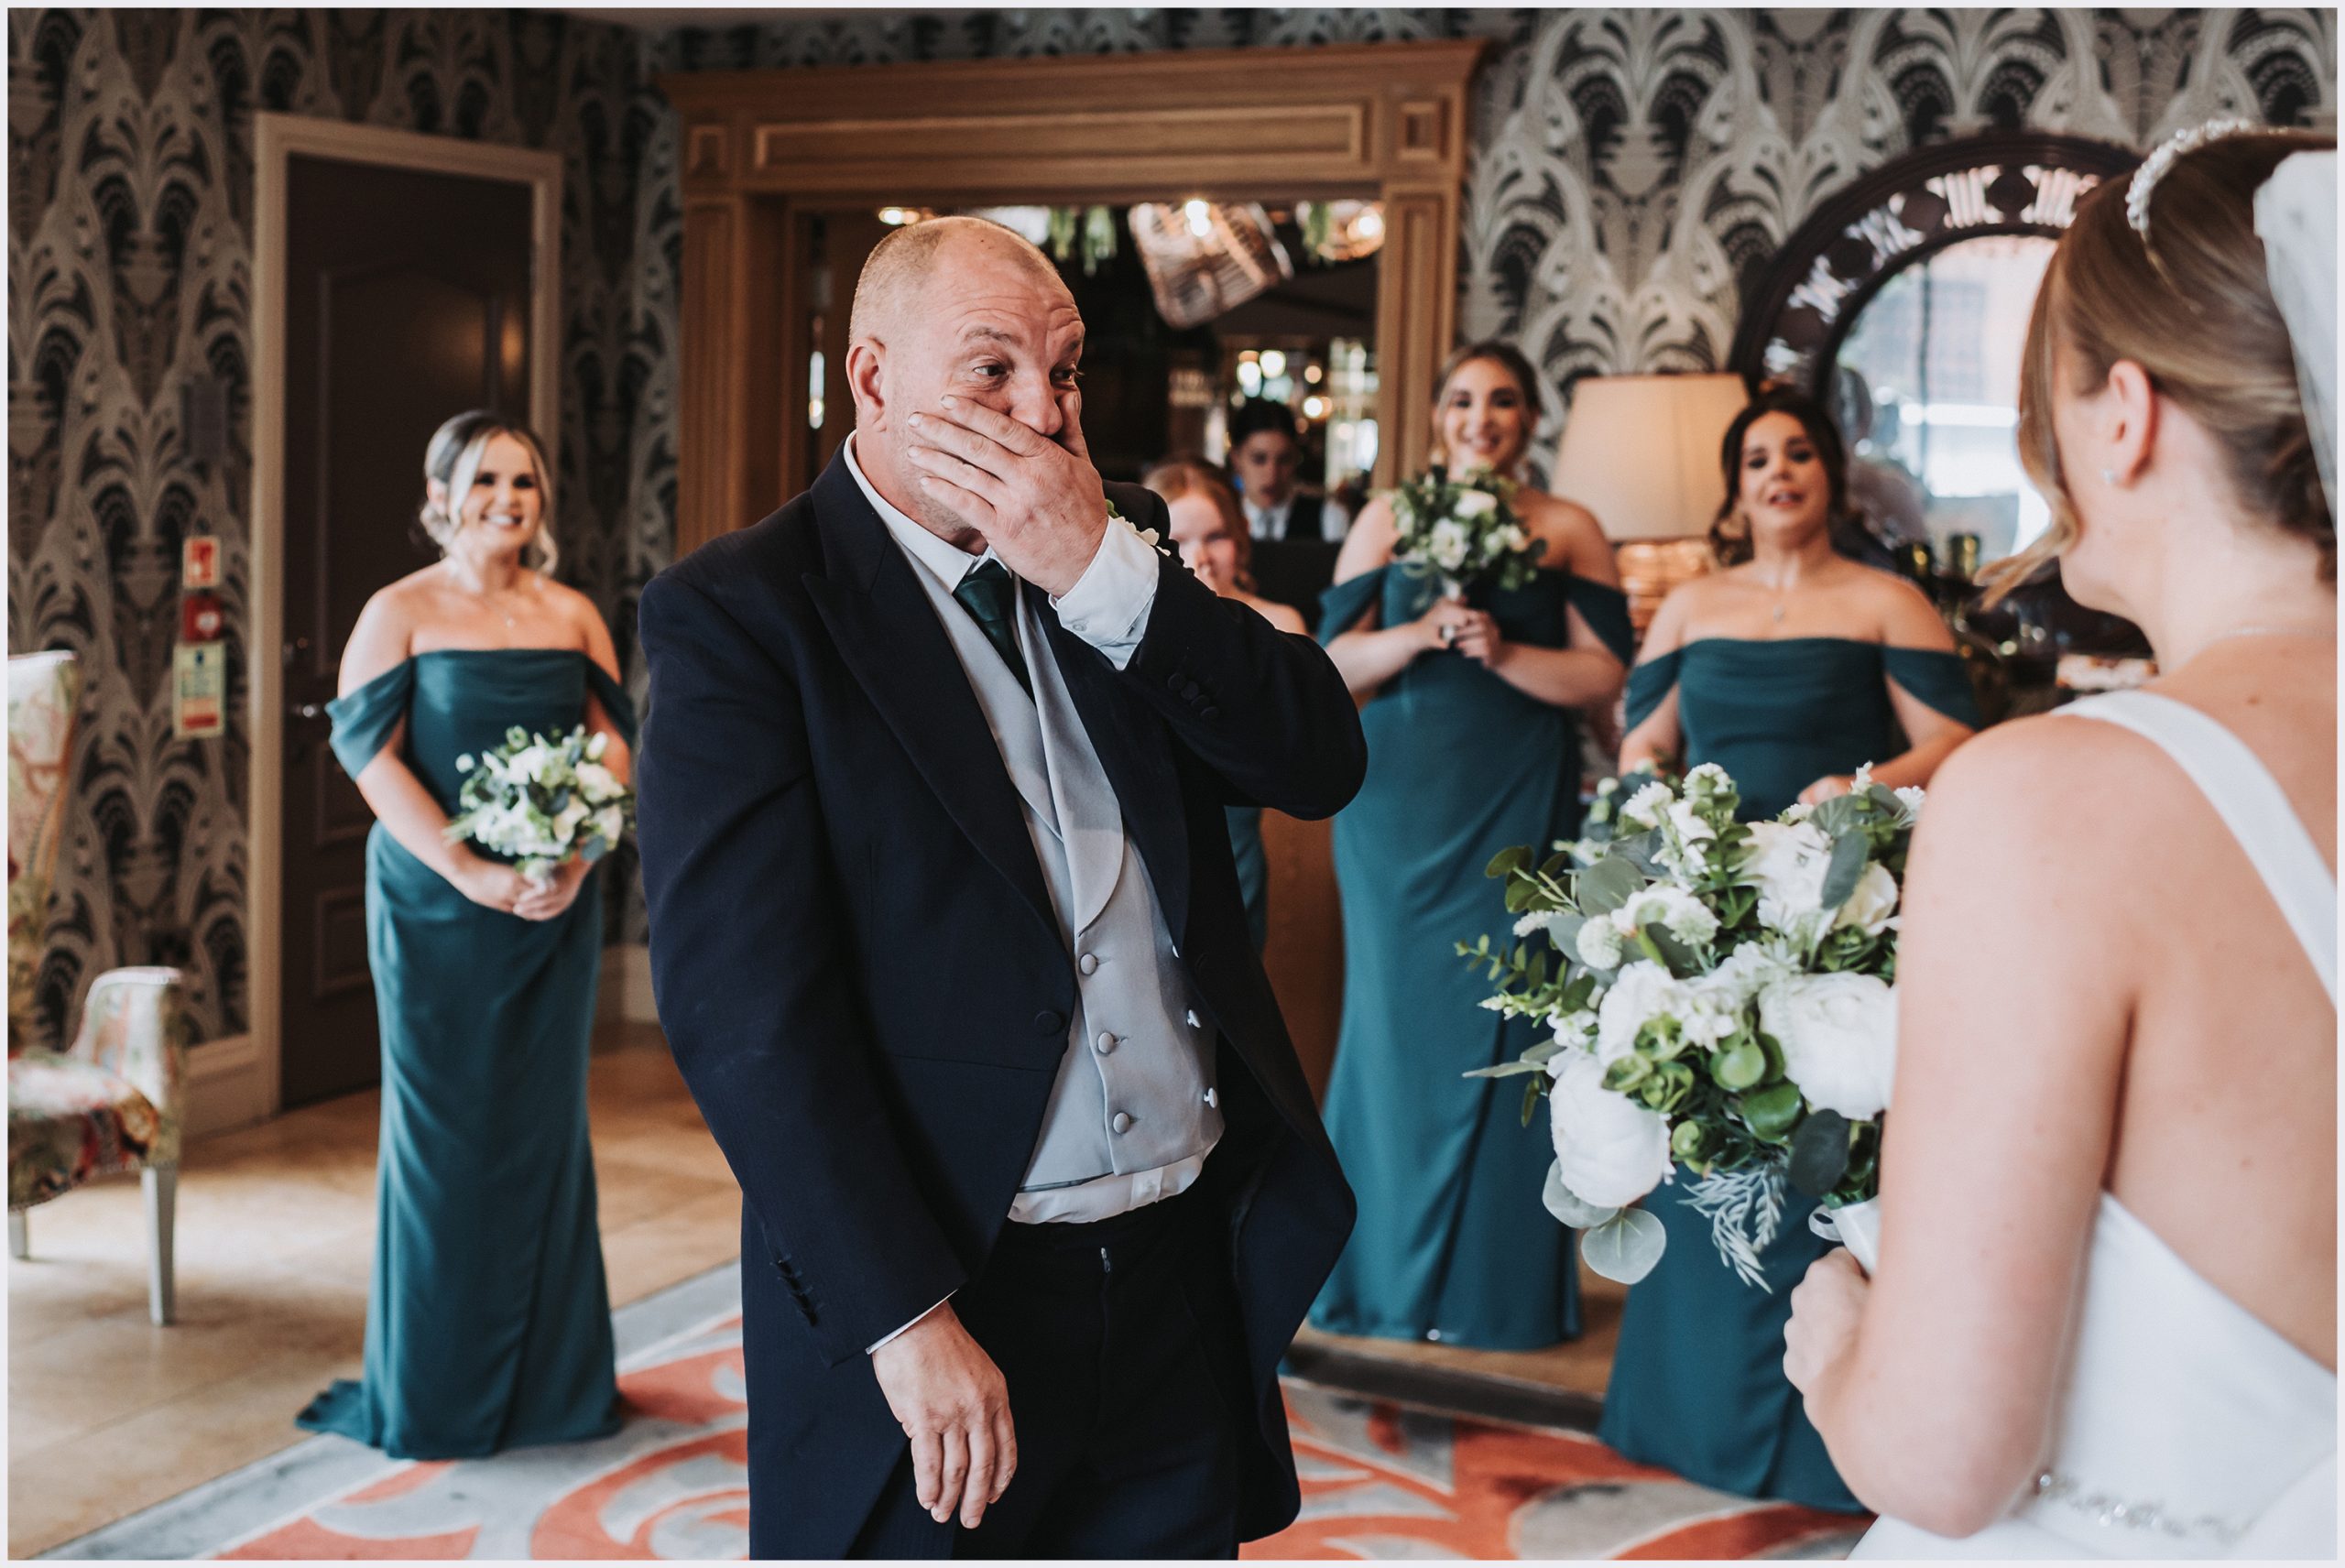 An emotional father of the bride looks at his daughter for the first time in her wedding dress.  Bridesmaids are standing in the background smiling.  Image captured at The Grosvenor Pulford Hotel and Spa by Helena Jayne photography a wedding photographer